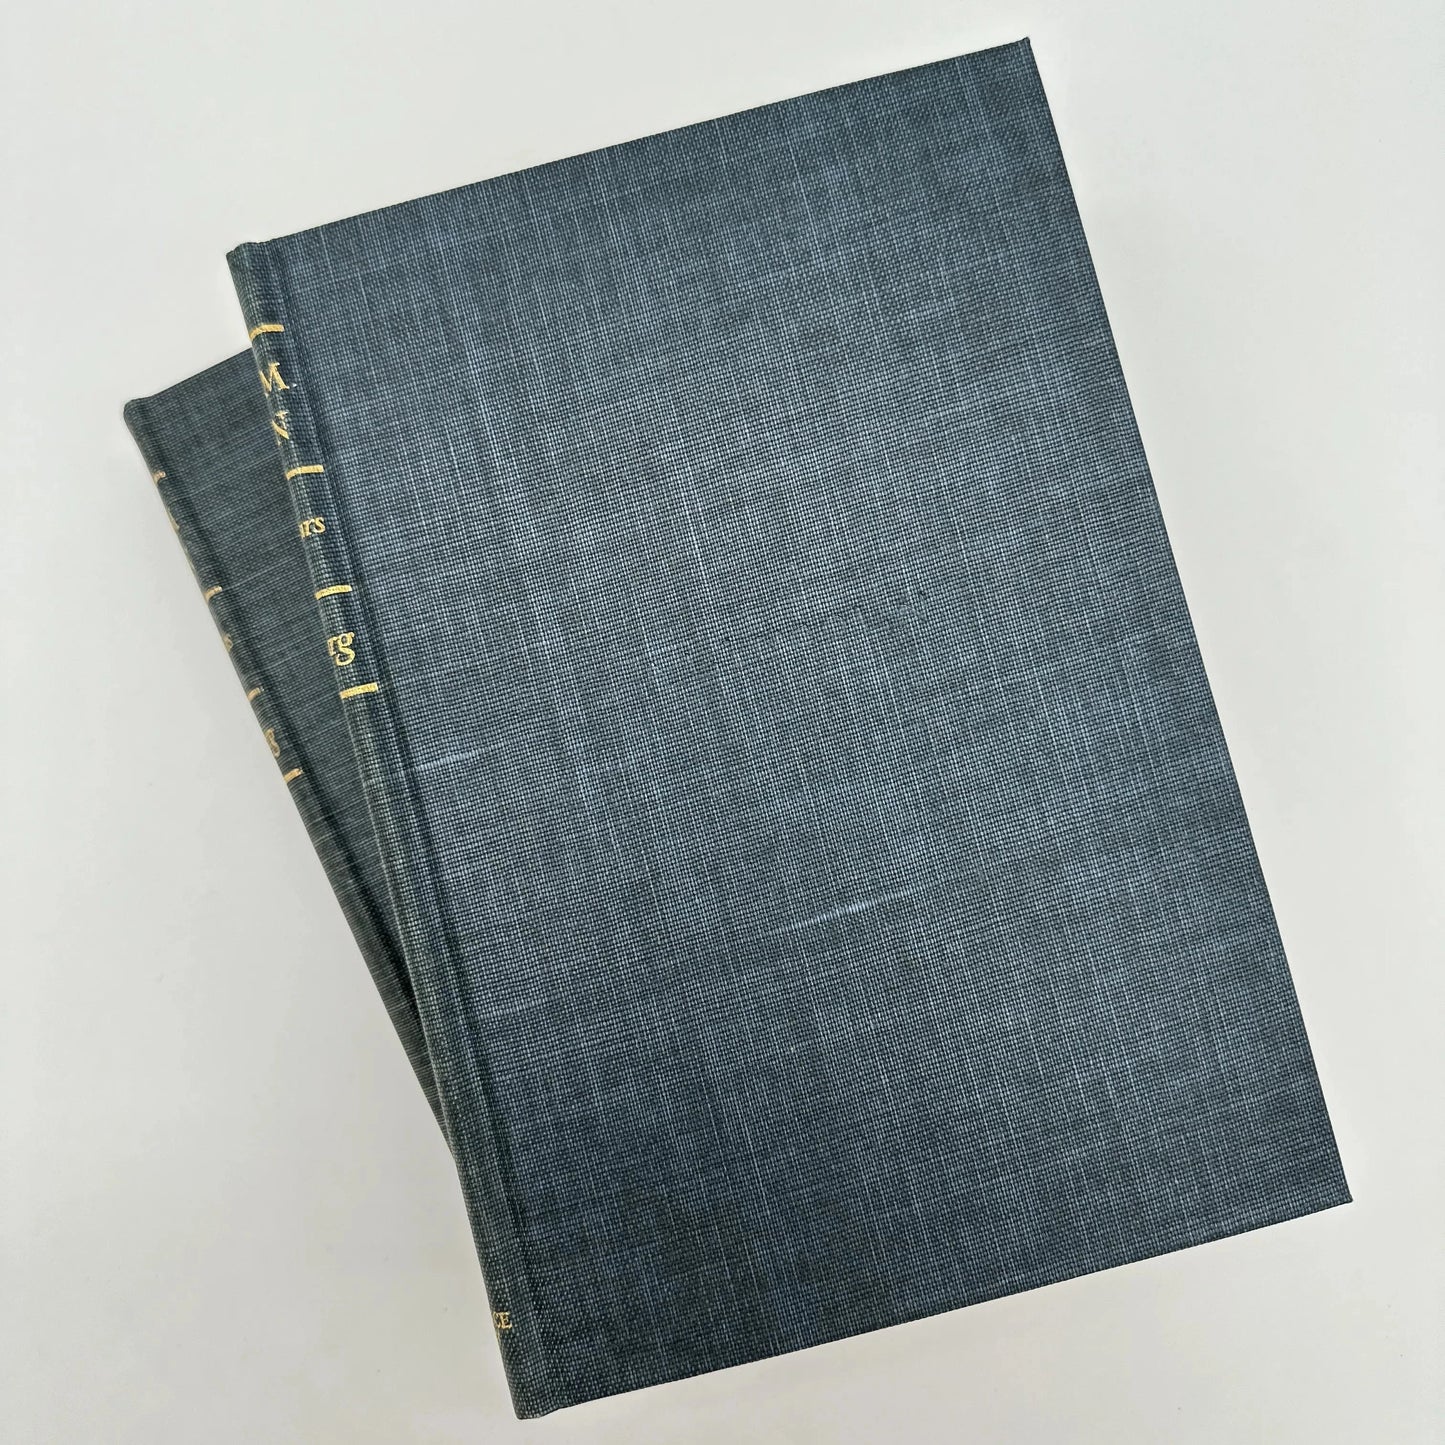 "Abraham Lincoln: The Prairie Years" by Carl Sandburg — Two volumes, in a slipcase